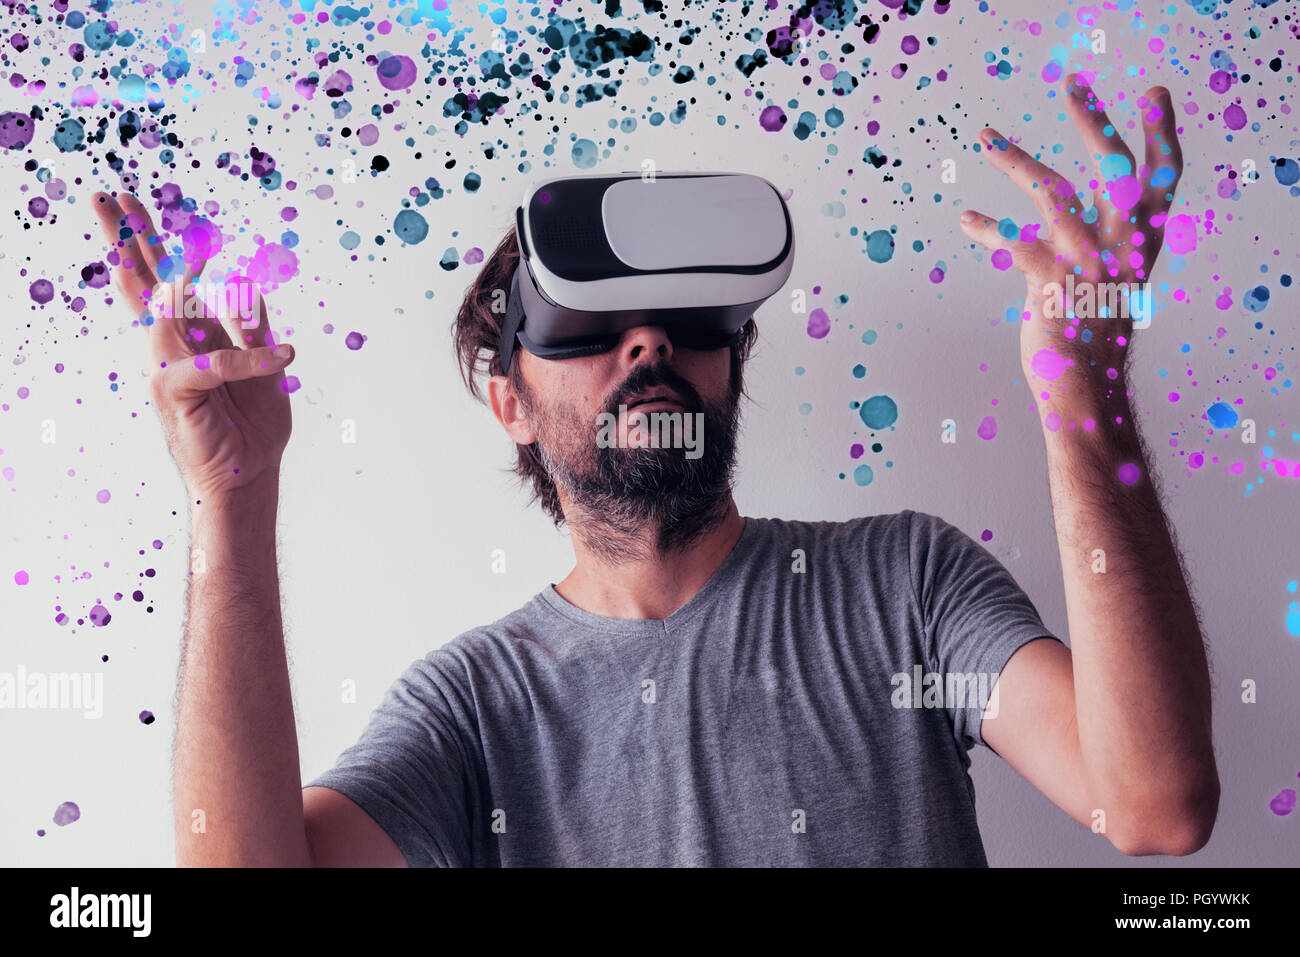 Virtual reality immersion, man wearing VR headset Stock Photo